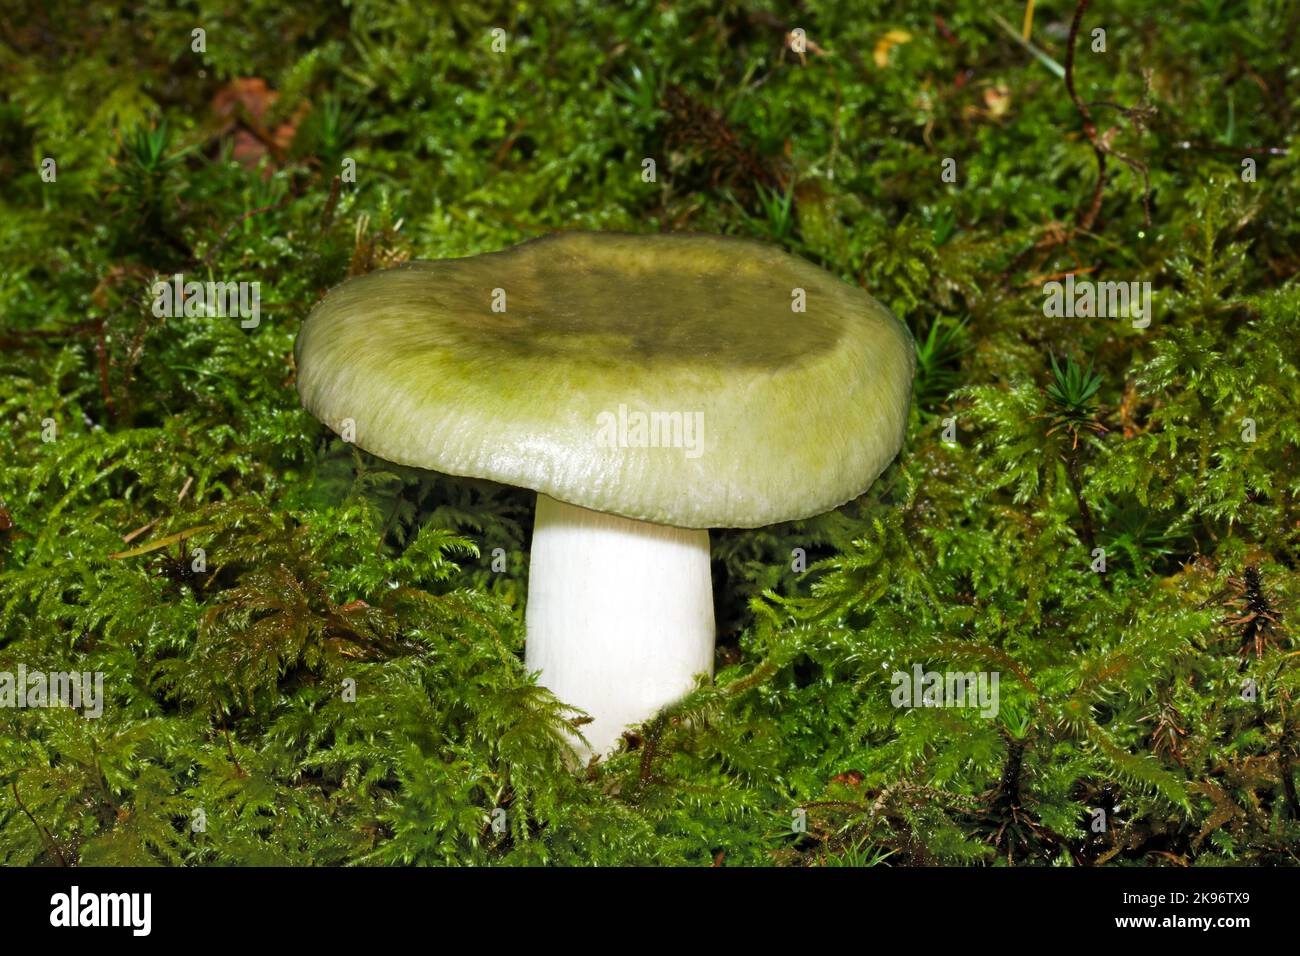 Russula cyanoxantha var. peltereaui (charcoal burner) is common throughout Europe in mixed forests. The variety peltereaui is a greenish colour. Stock Photo